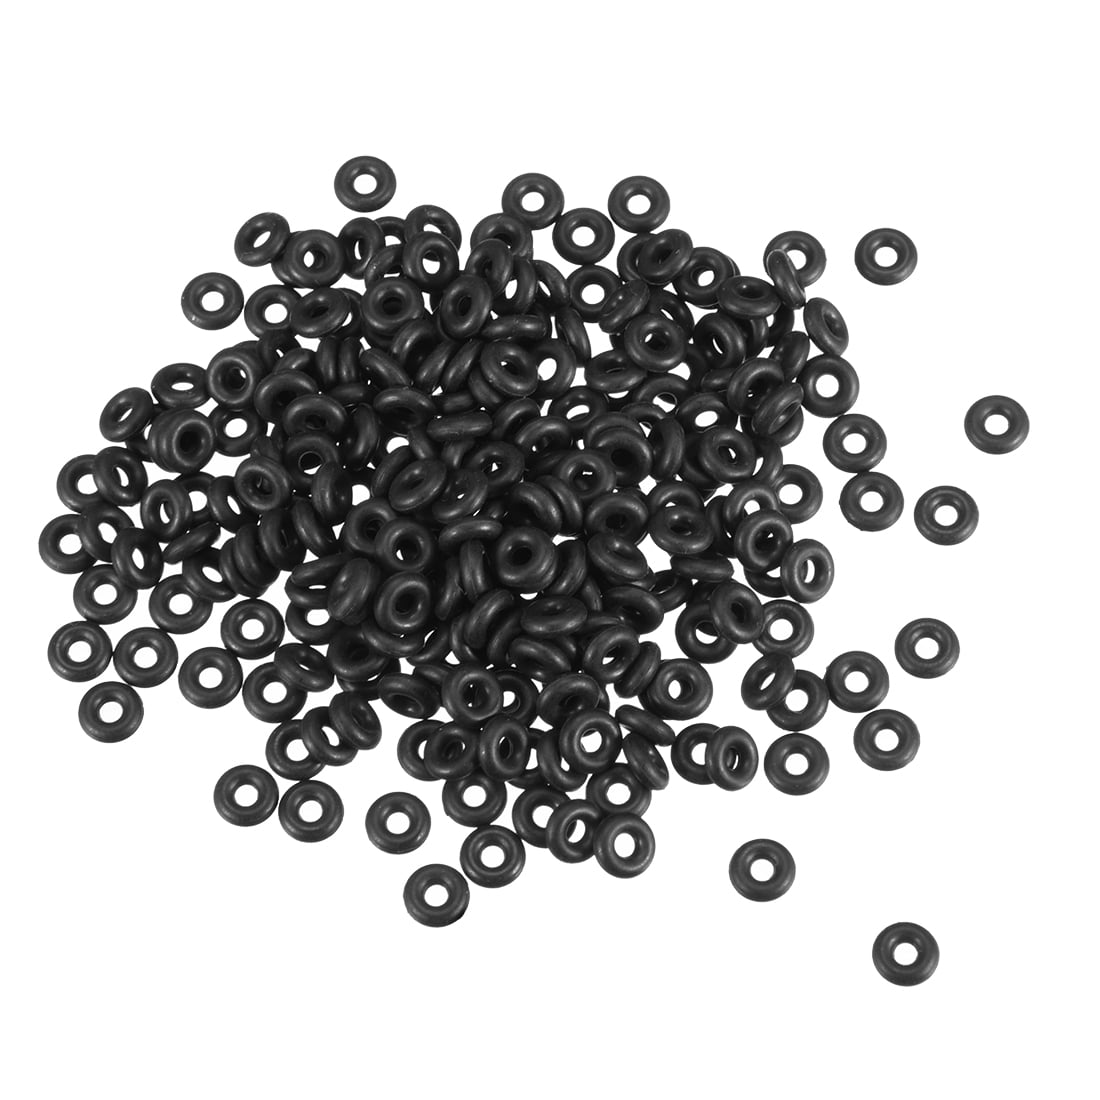 4mm Section 112mm Bore NITRILE 70 Rubber O-Rings 